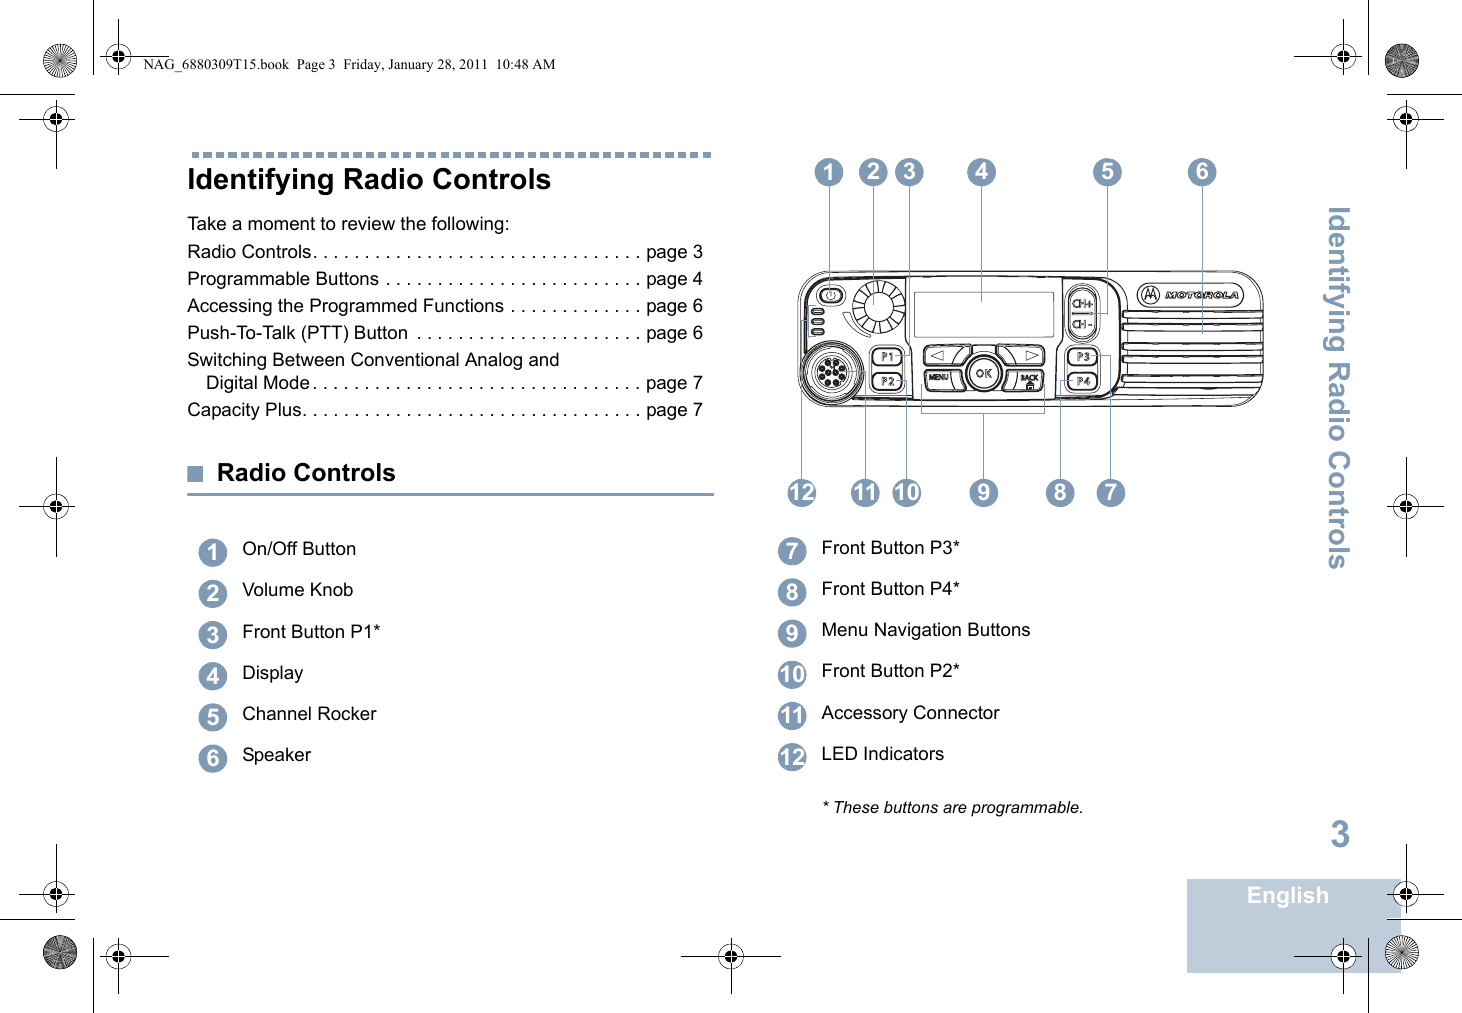 Identifying Radio ControlsEnglish3Identifying Radio ControlsTake a moment to review the following:Radio Controls. . . . . . . . . . . . . . . . . . . . . . . . . . . . . . . . page 3Programmable Buttons . . . . . . . . . . . . . . . . . . . . . . . . . page 4Accessing the Programmed Functions . . . . . . . . . . . . . page 6Push-To-Talk (PTT) Button  . . . . . . . . . . . . . . . . . . . . . . page 6Switching Between Conventional Analog and Digital Mode. . . . . . . . . . . . . . . . . . . . . . . . . . . . . . . . page 7Capacity Plus. . . . . . . . . . . . . . . . . . . . . . . . . . . . . . . . . page 7Radio ControlsOn/Off ButtonVolume KnobFront Button P1*DisplayChannel RockerSpeaker123456Front Button P3*Front Button P4*Menu Navigation ButtonsFront Button P2*Accessory ConnectorLED Indicators* These buttons are programmable.P 1O KP 2P 3P 4CH+BACKMENUCH -12 3 65412 11 8 7910789101112NAG_6880309T15.book  Page 3  Friday, January 28, 2011  10:48 AM